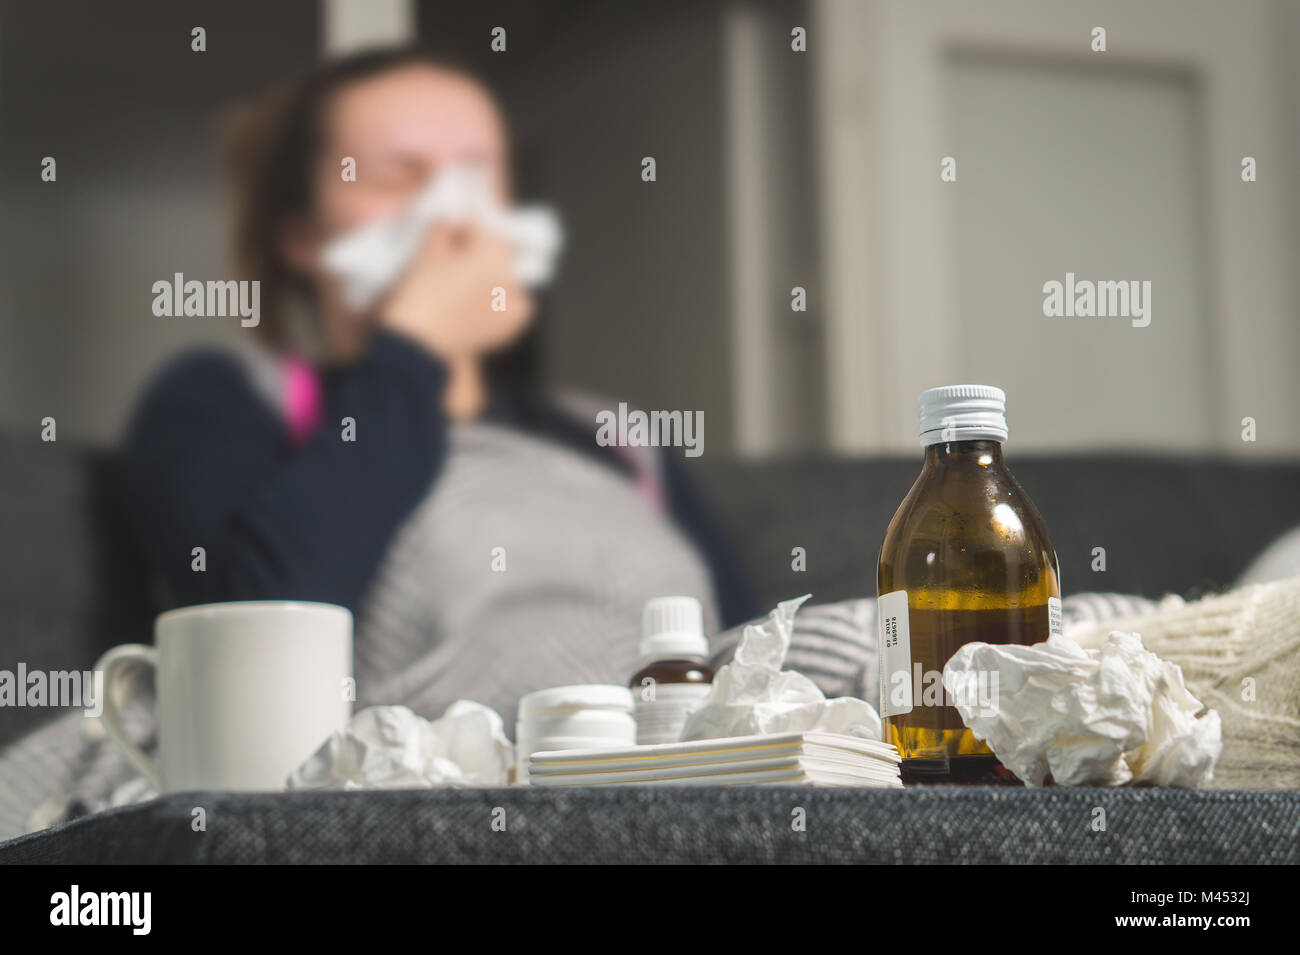 Sick woman sneezing to tissue. Medicine, hot beverage and dirty paper towels in front. Girl caught cold. Cough syrup and handkerchiefs on table. Stock Photo